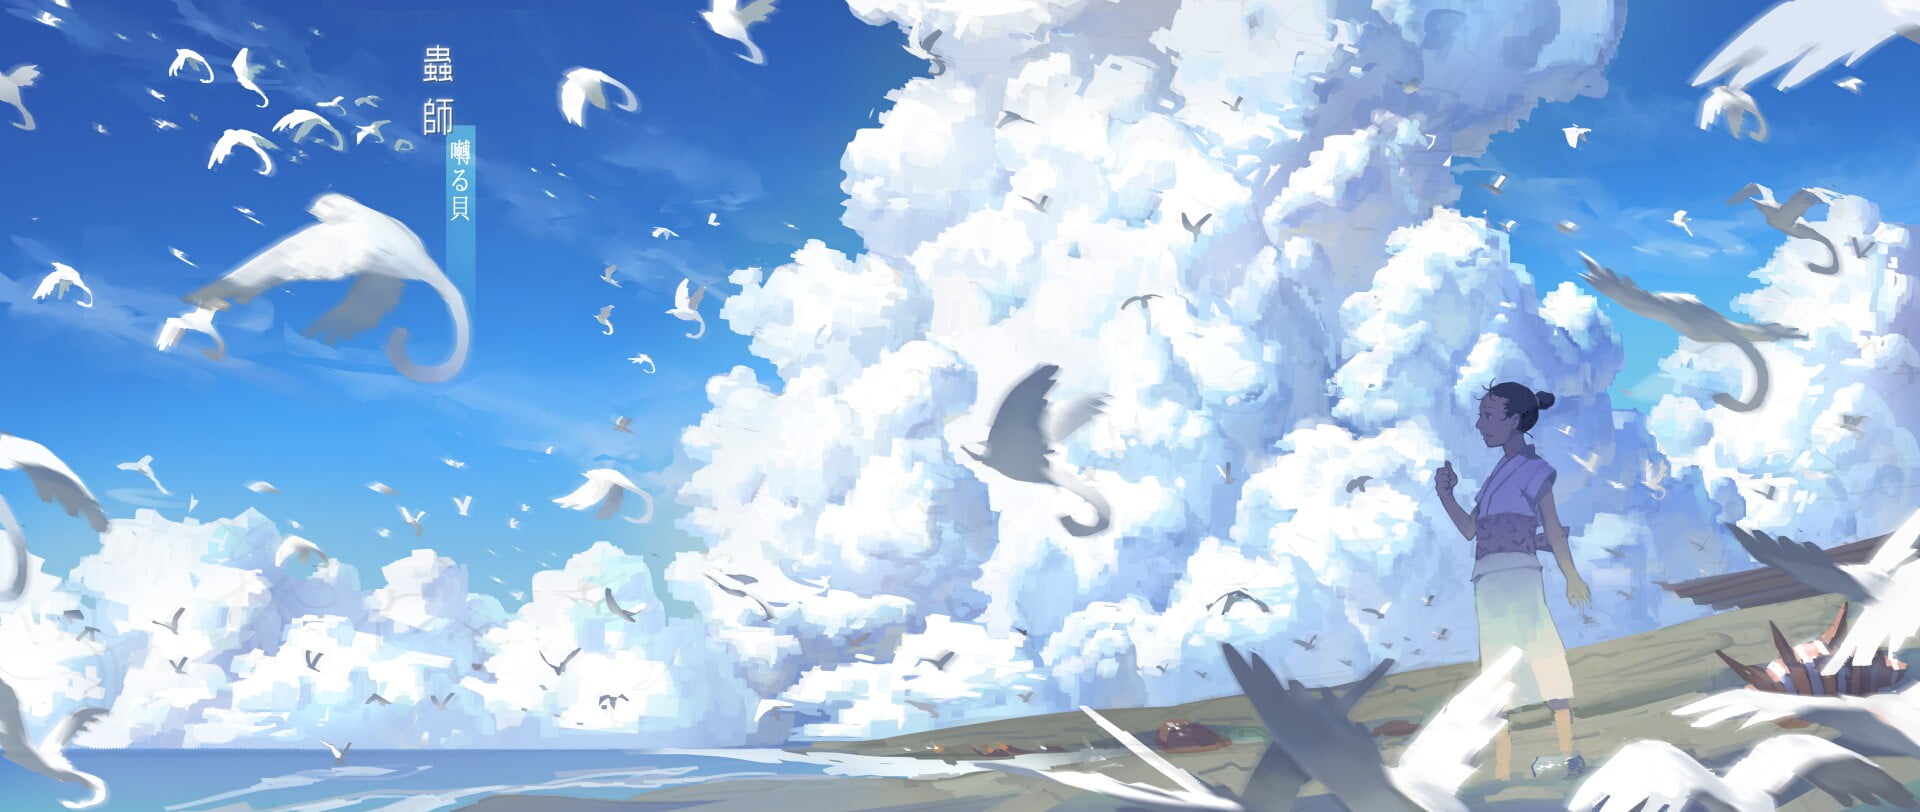 black haired anime character wallpaper, birds, clouds, Mushishi